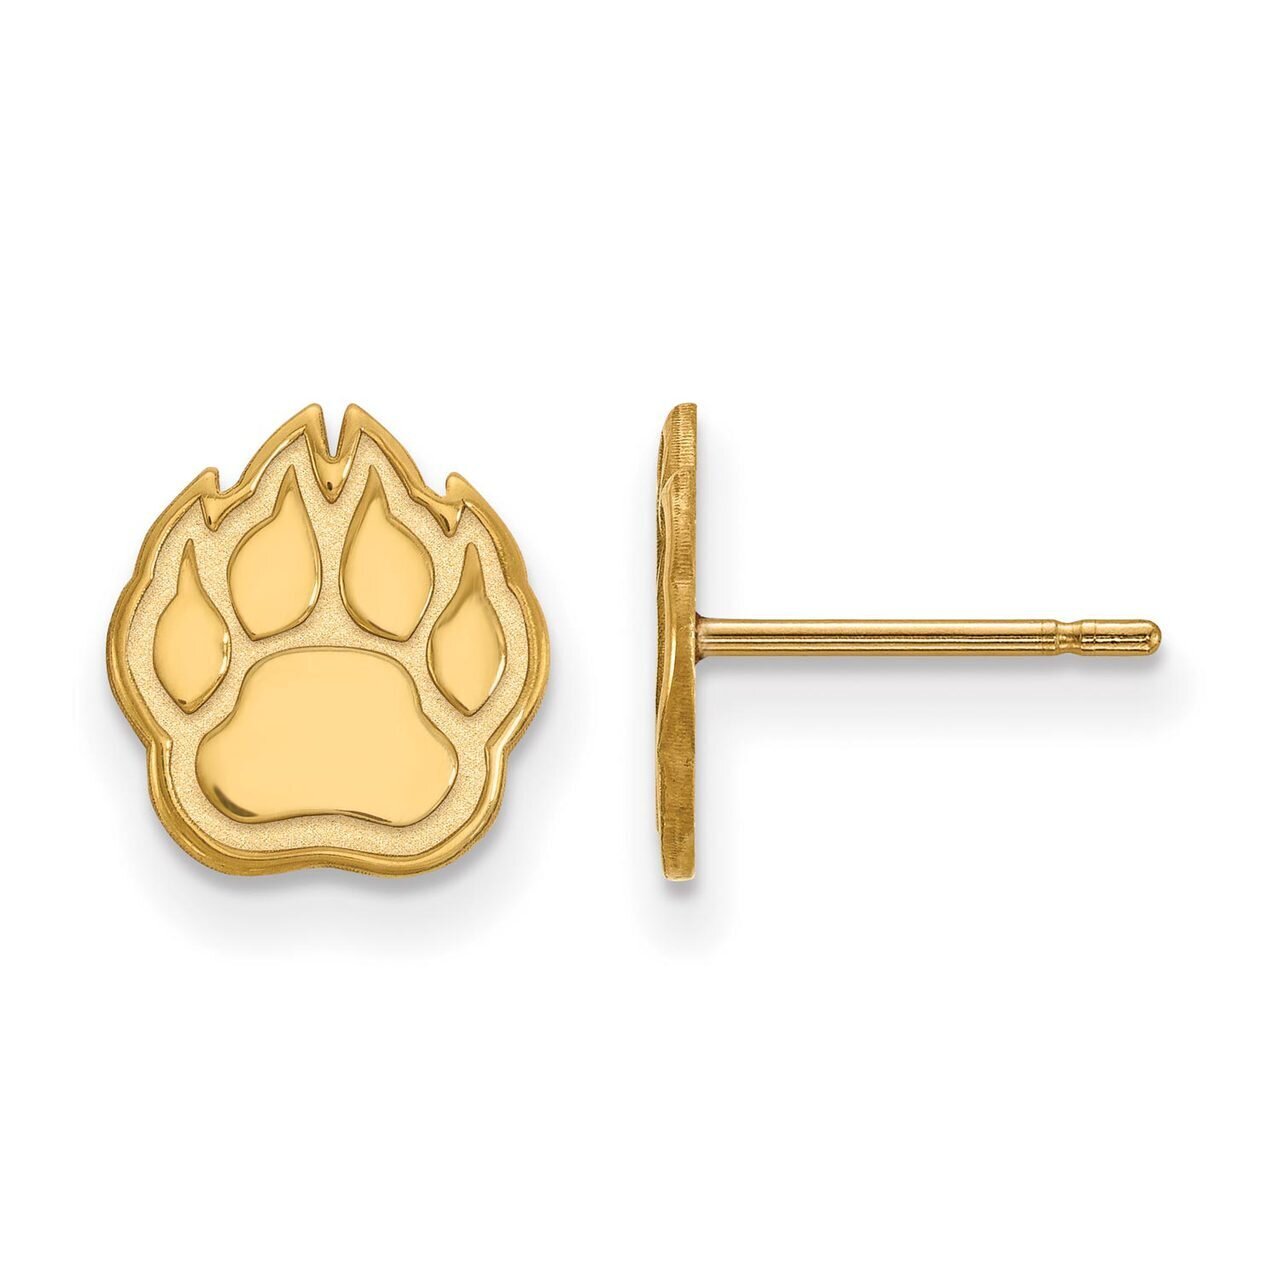 Northern Illinois University x-Small Post Earring Gold-plated Silver GP024NIU